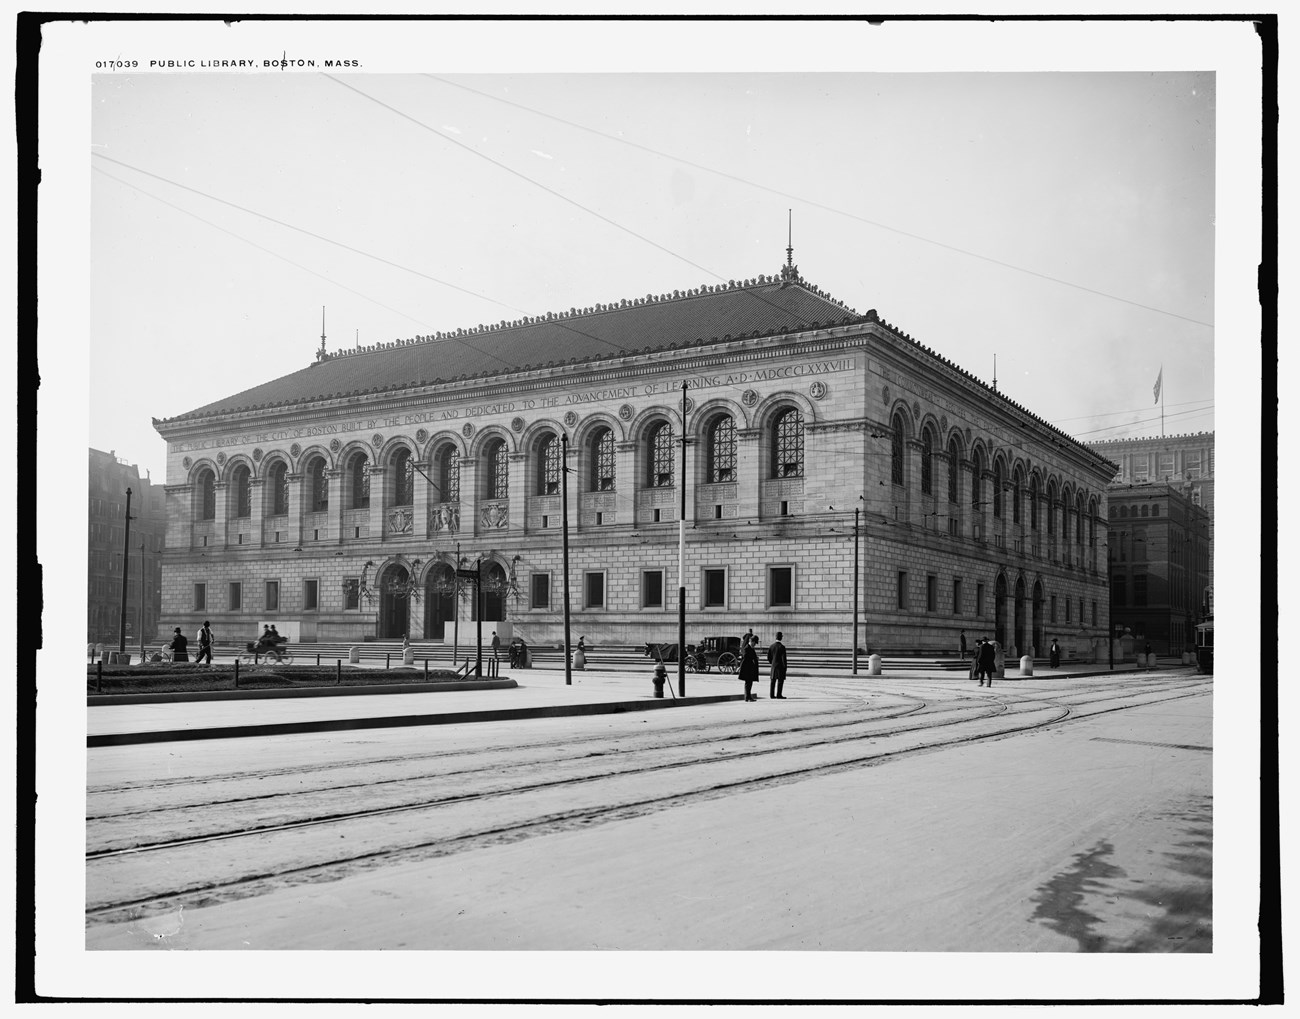 A black and white photo of a high style building. It has ornate details along the roof and is lined with large windows across the facade. Stone details emphasize the high level of ornamentation on the entire building.